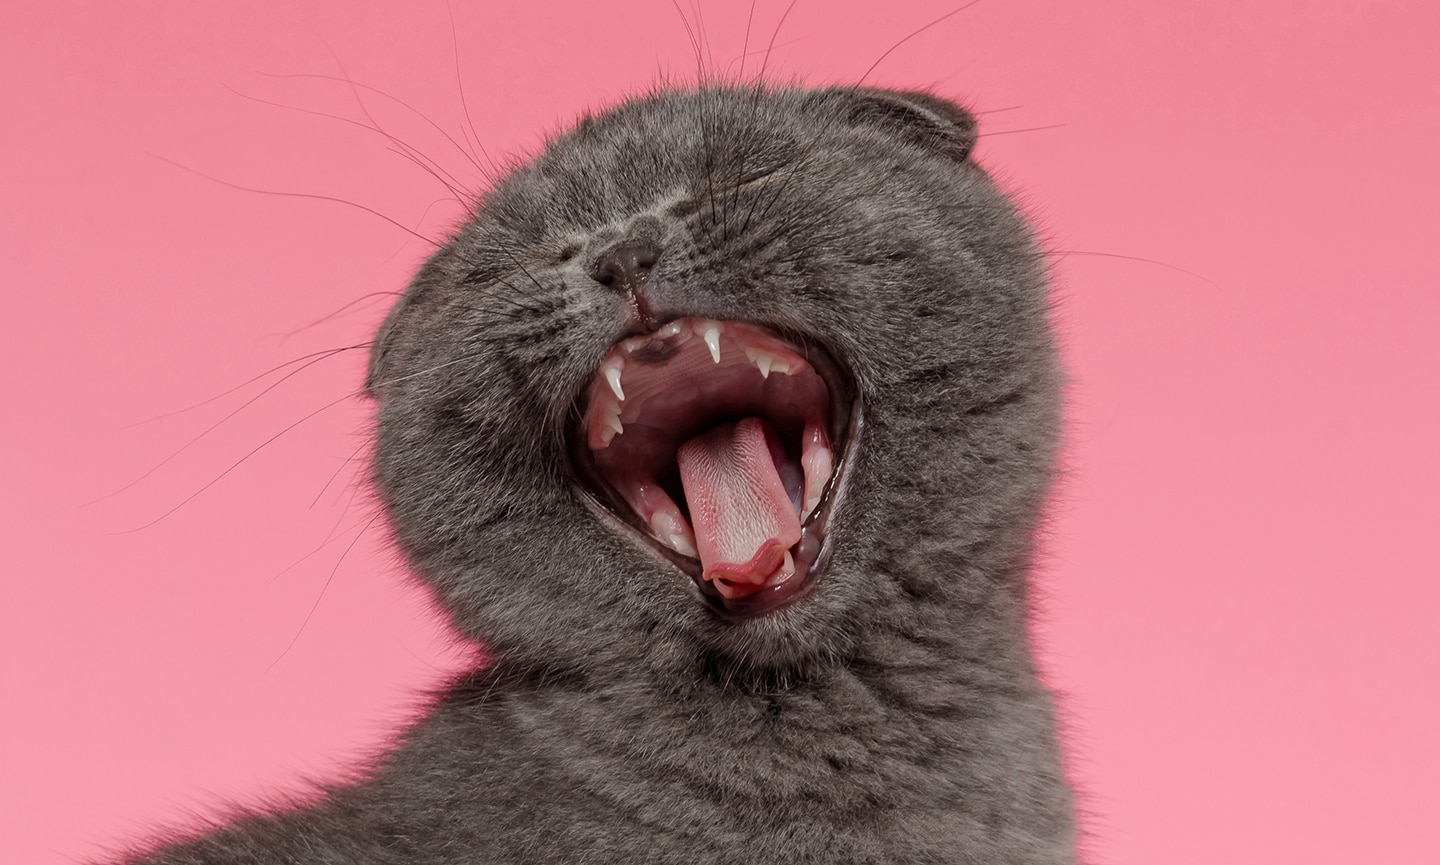 how many teeth do cats have: cat yawning pink background